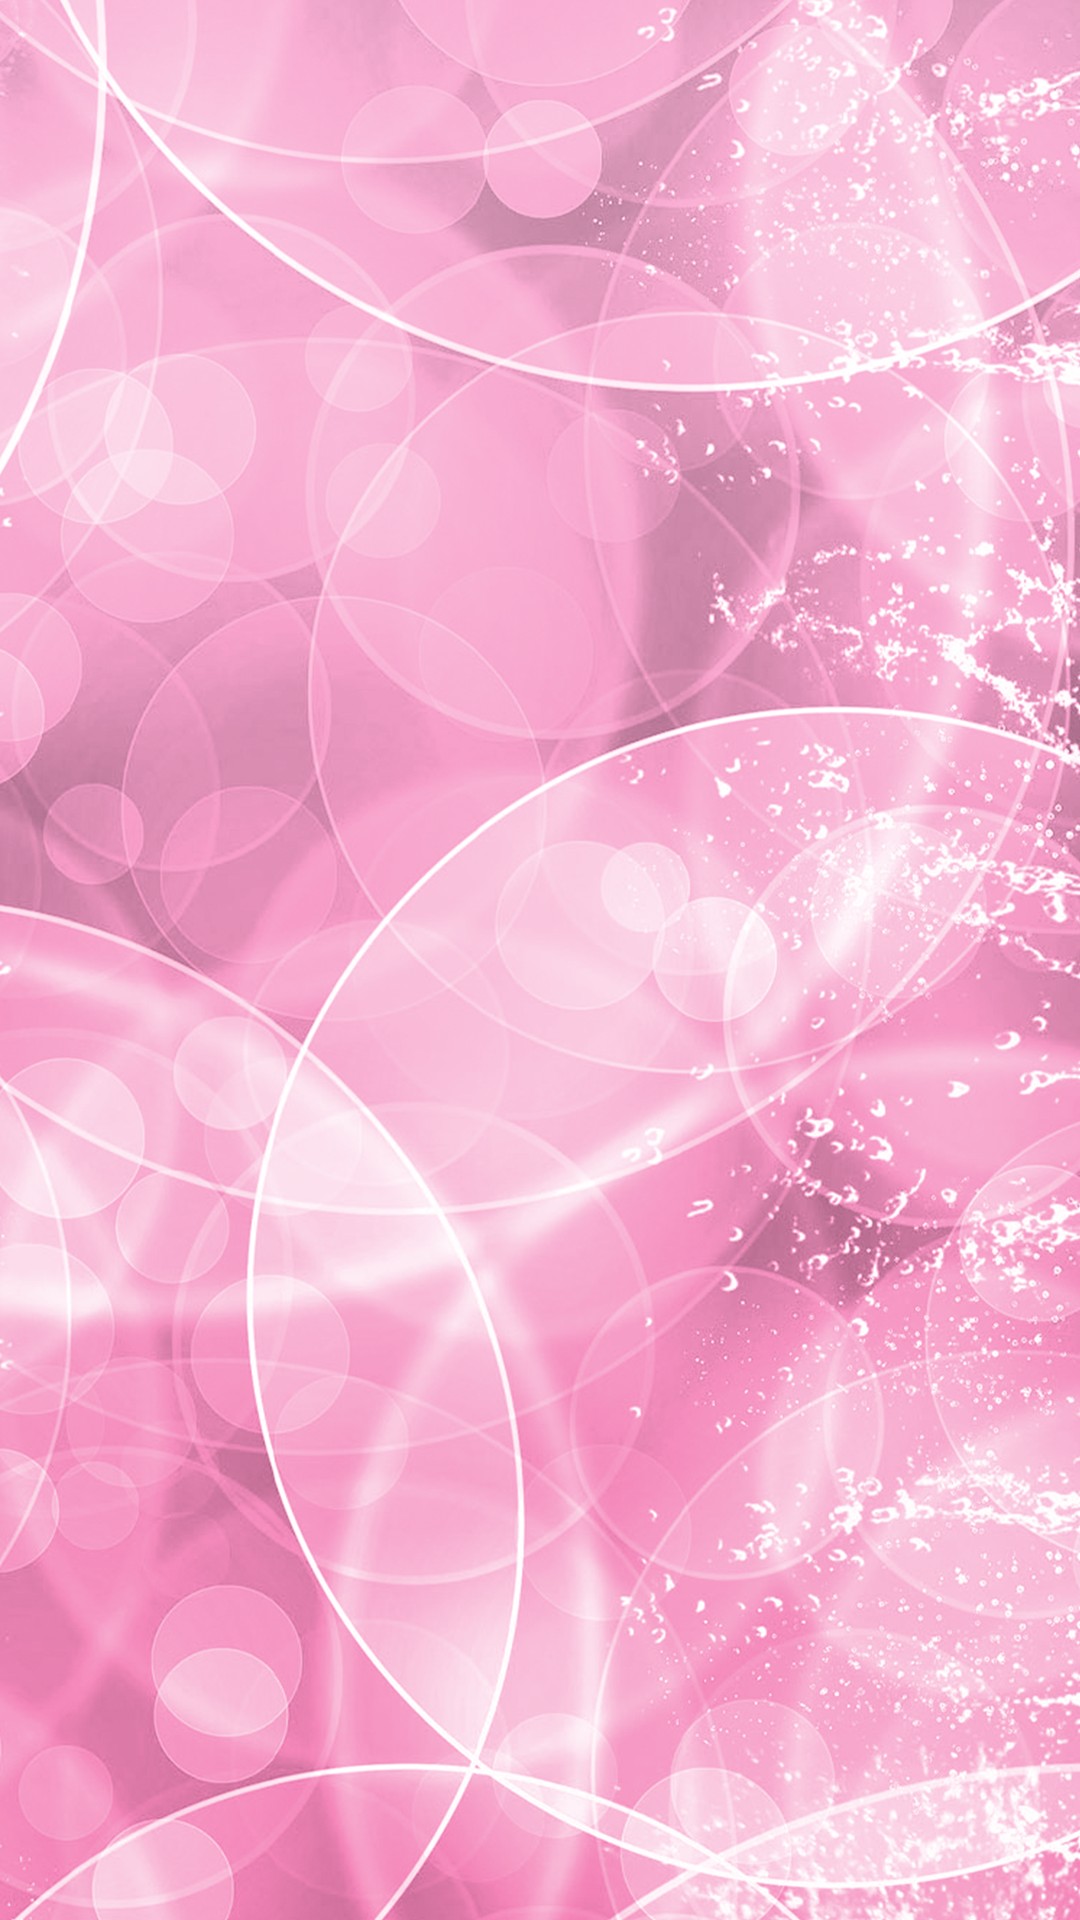 Girly wallpaper \u00b7\u2460 Download free cool HD backgrounds for desktop, mobile, laptop in any 